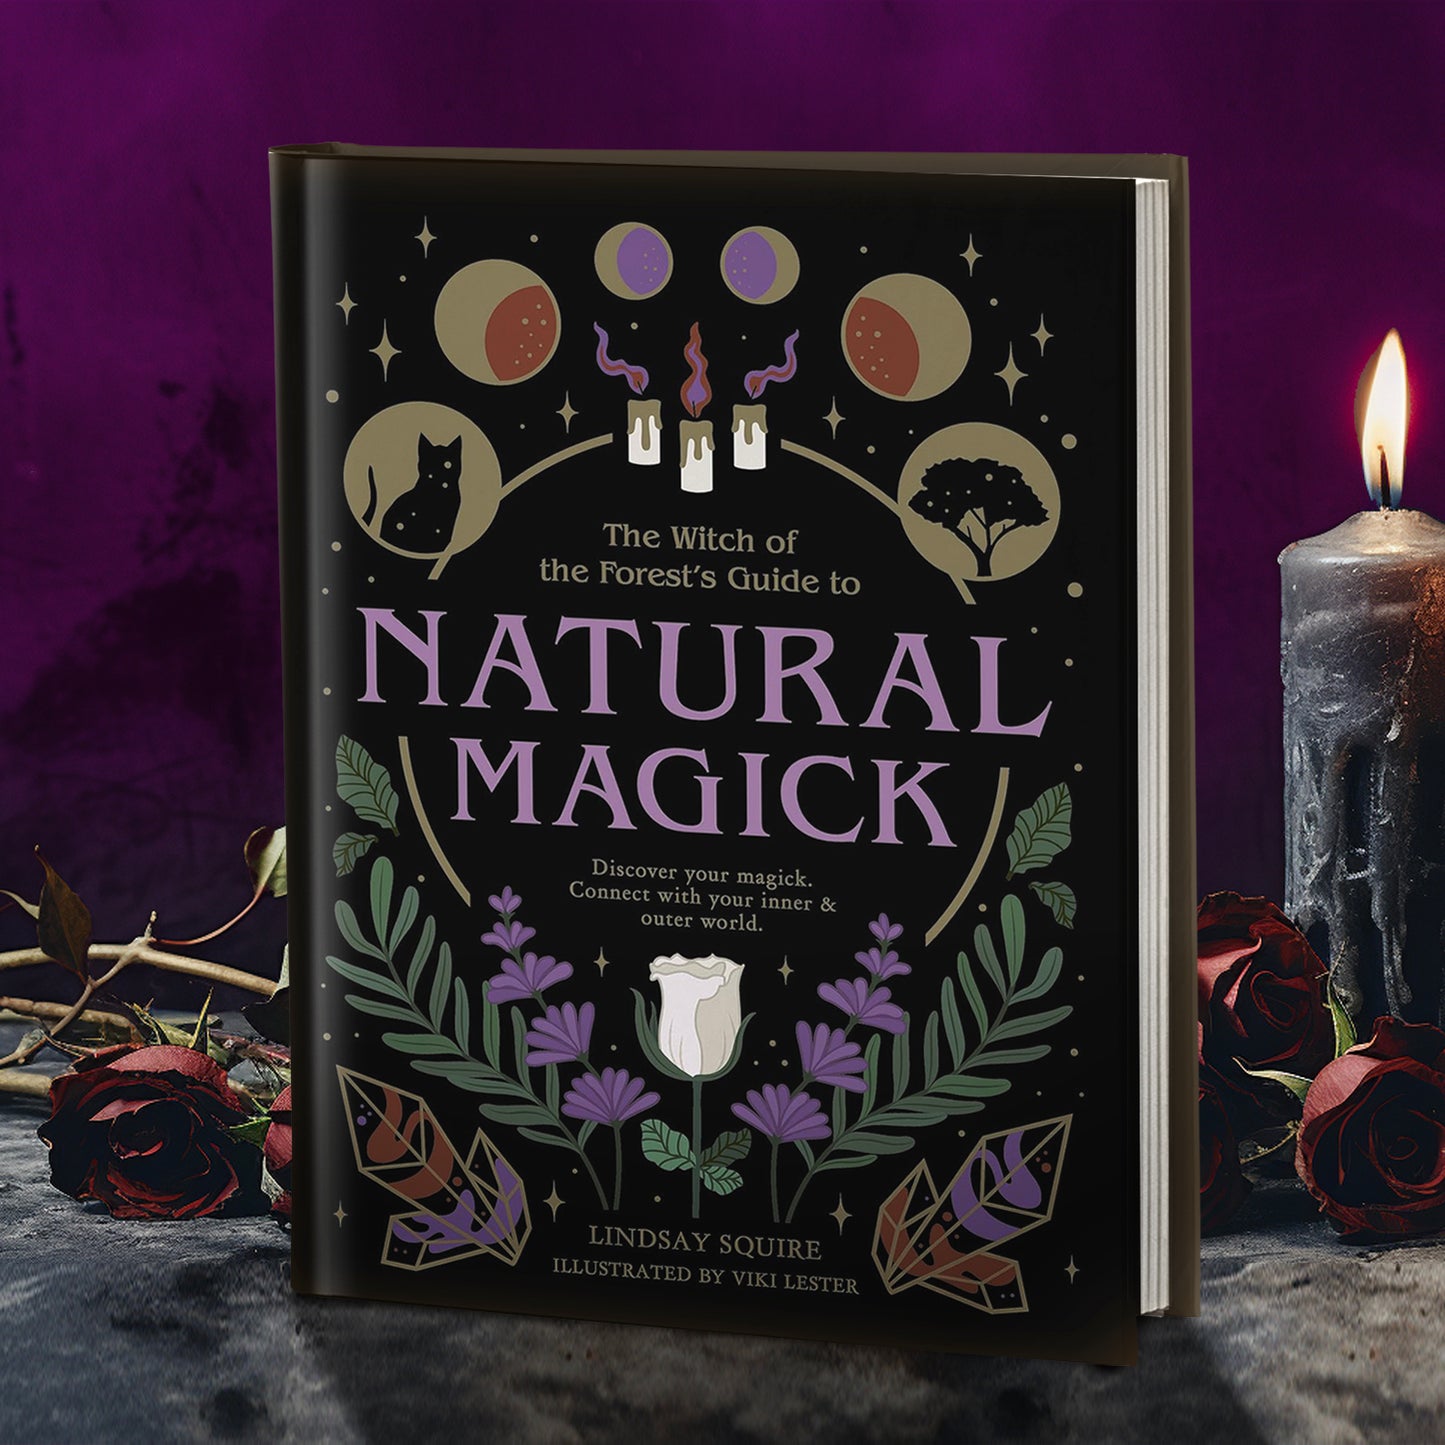 A hardcover copy of "The witch of the forest's guide to natural magick: Discover your magick, connect with your inner & outer world". The cover is black with sage green, forest green, and lavender details.